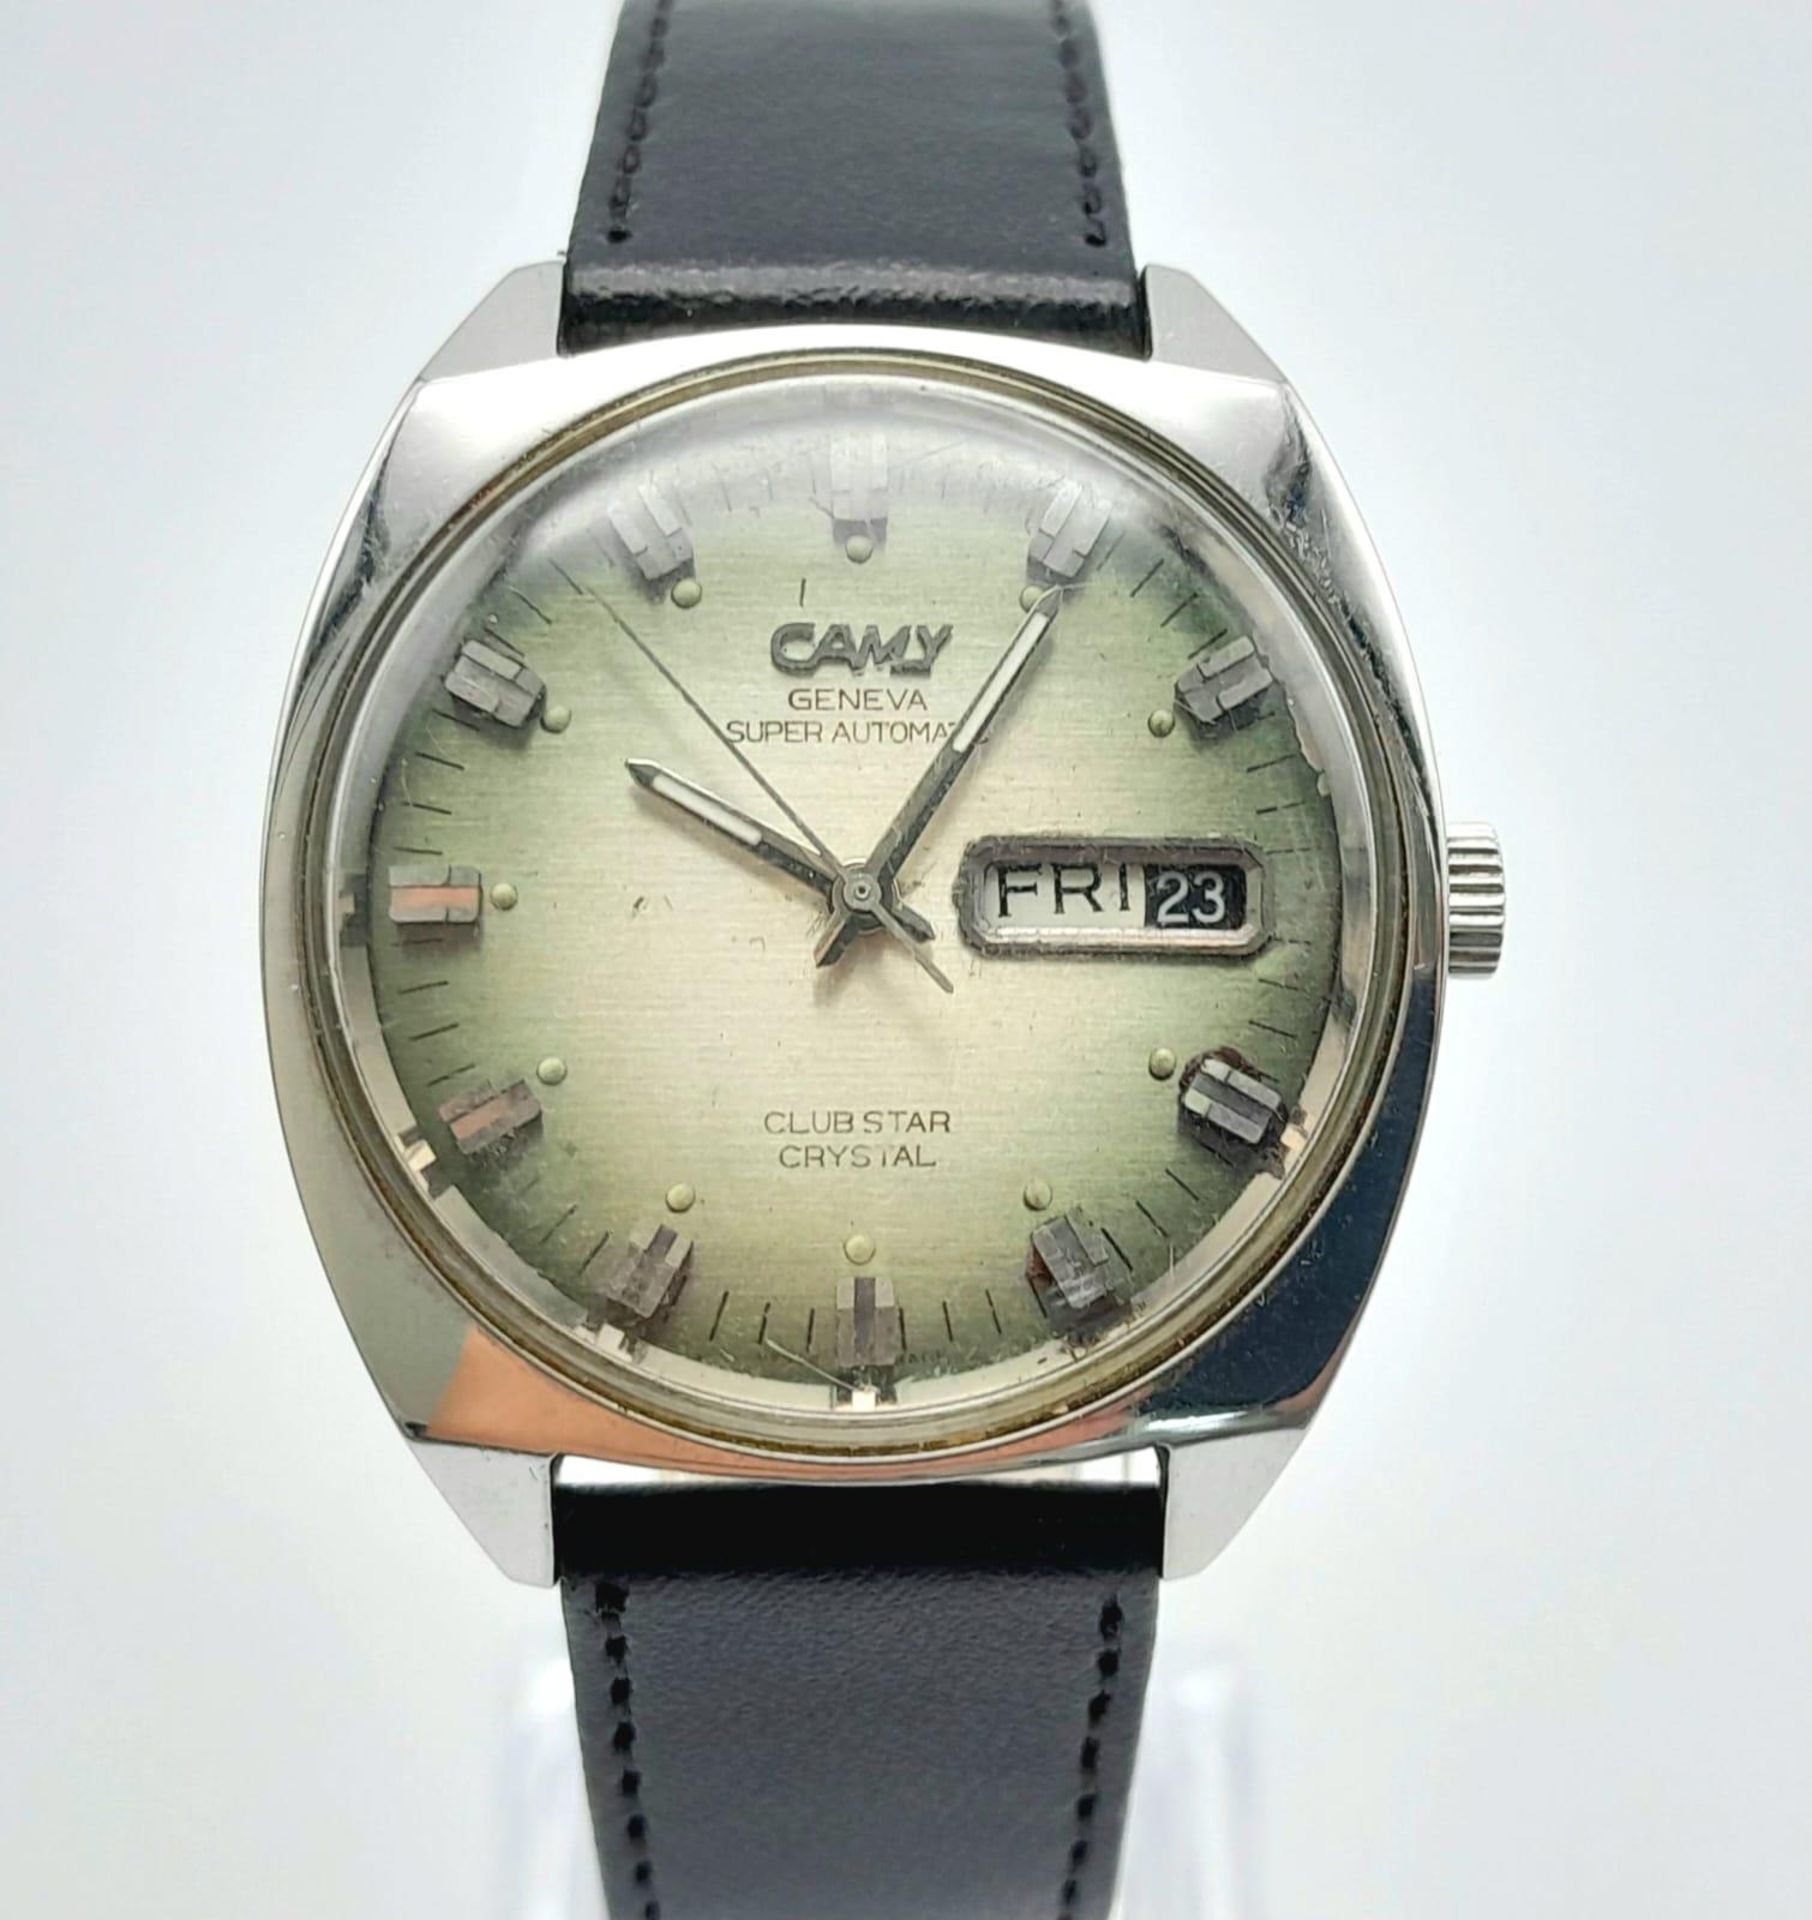 A Vintage Camy Super Automatic Club Star Gents Watch. Black leather strap and stainless steel case -